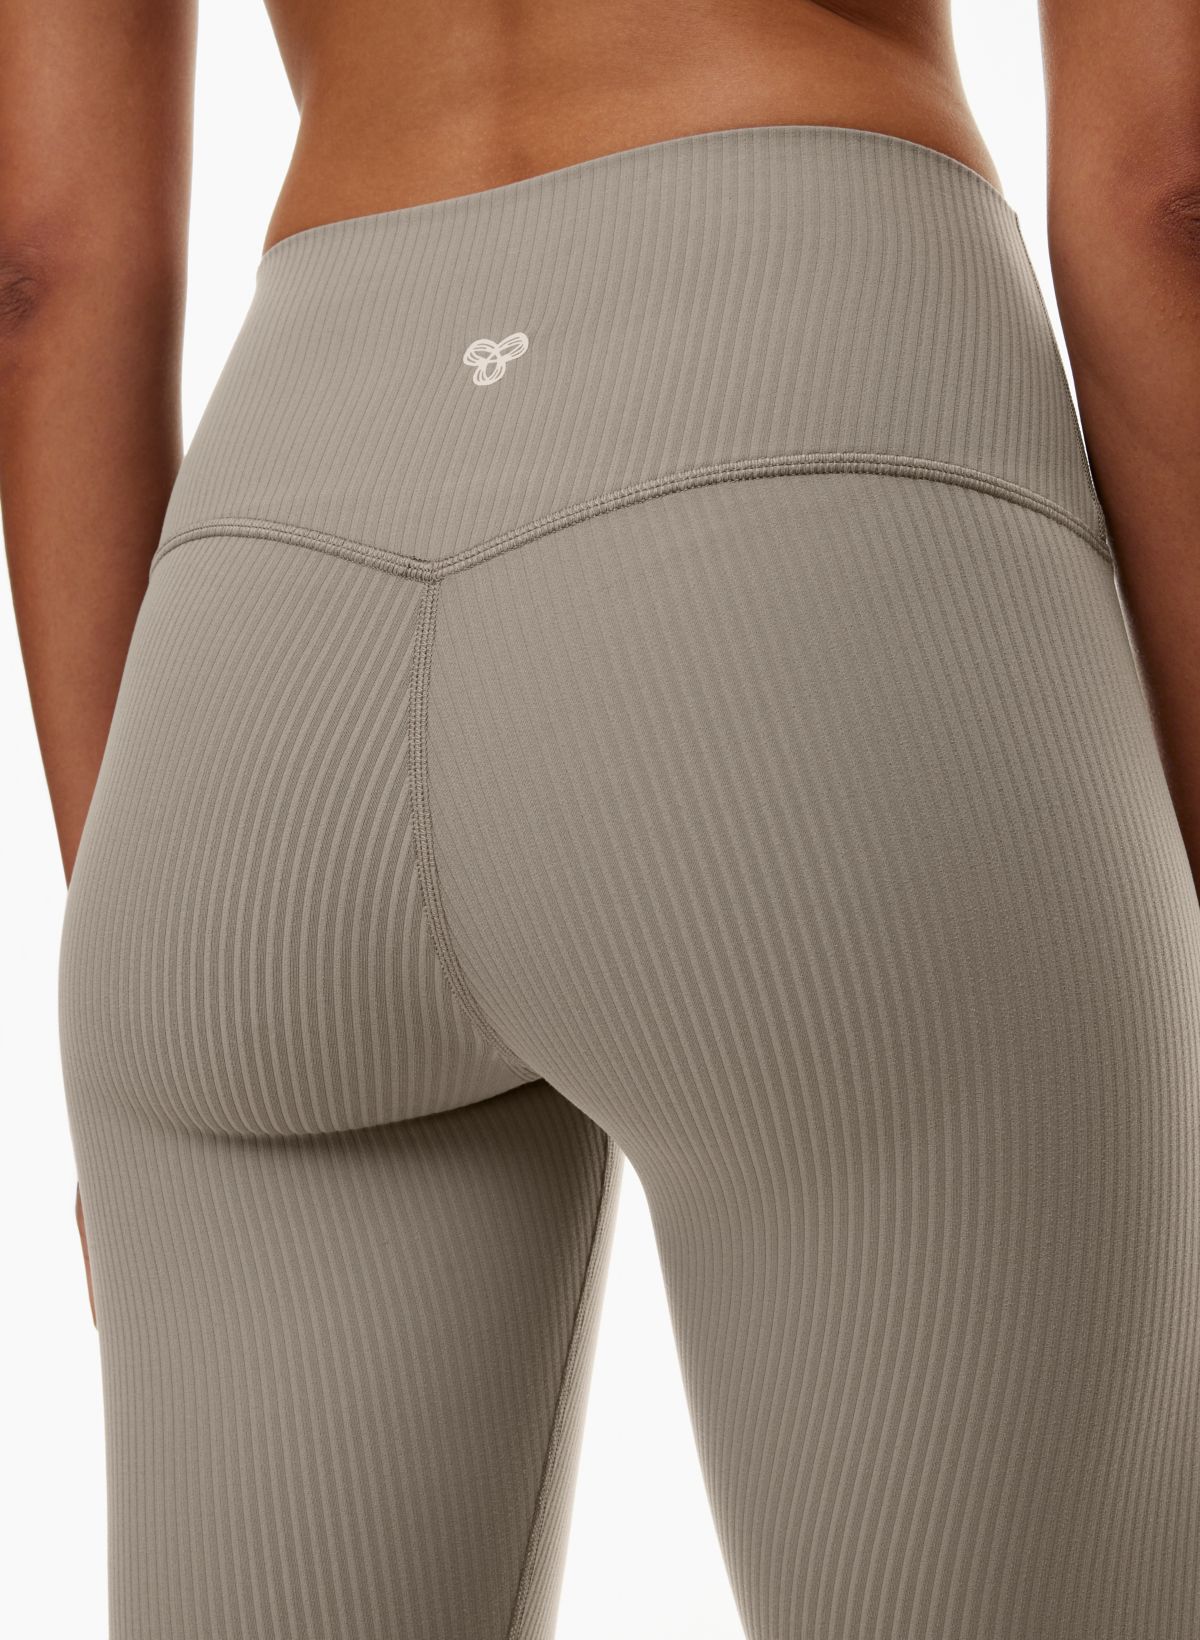 Official High Waisted Thick Ribbed Leggings